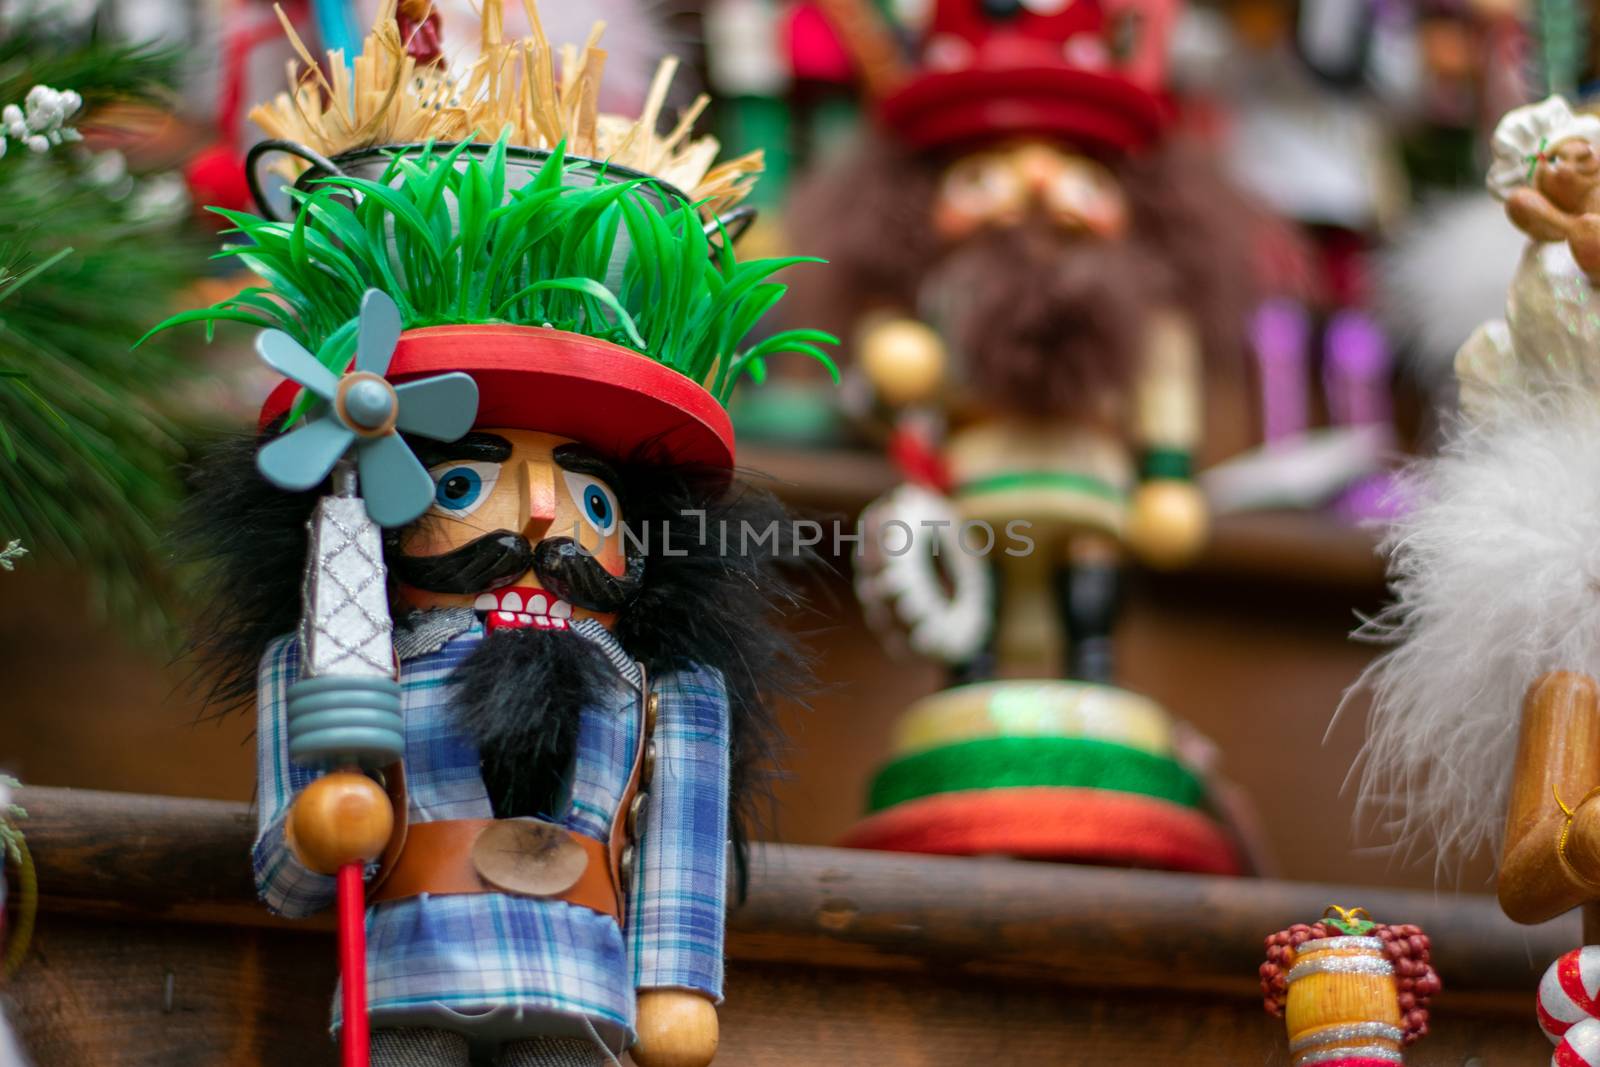 A Funny Looking Nutcracker on a Wooden Shelf With Other Nutcrack by bju12290